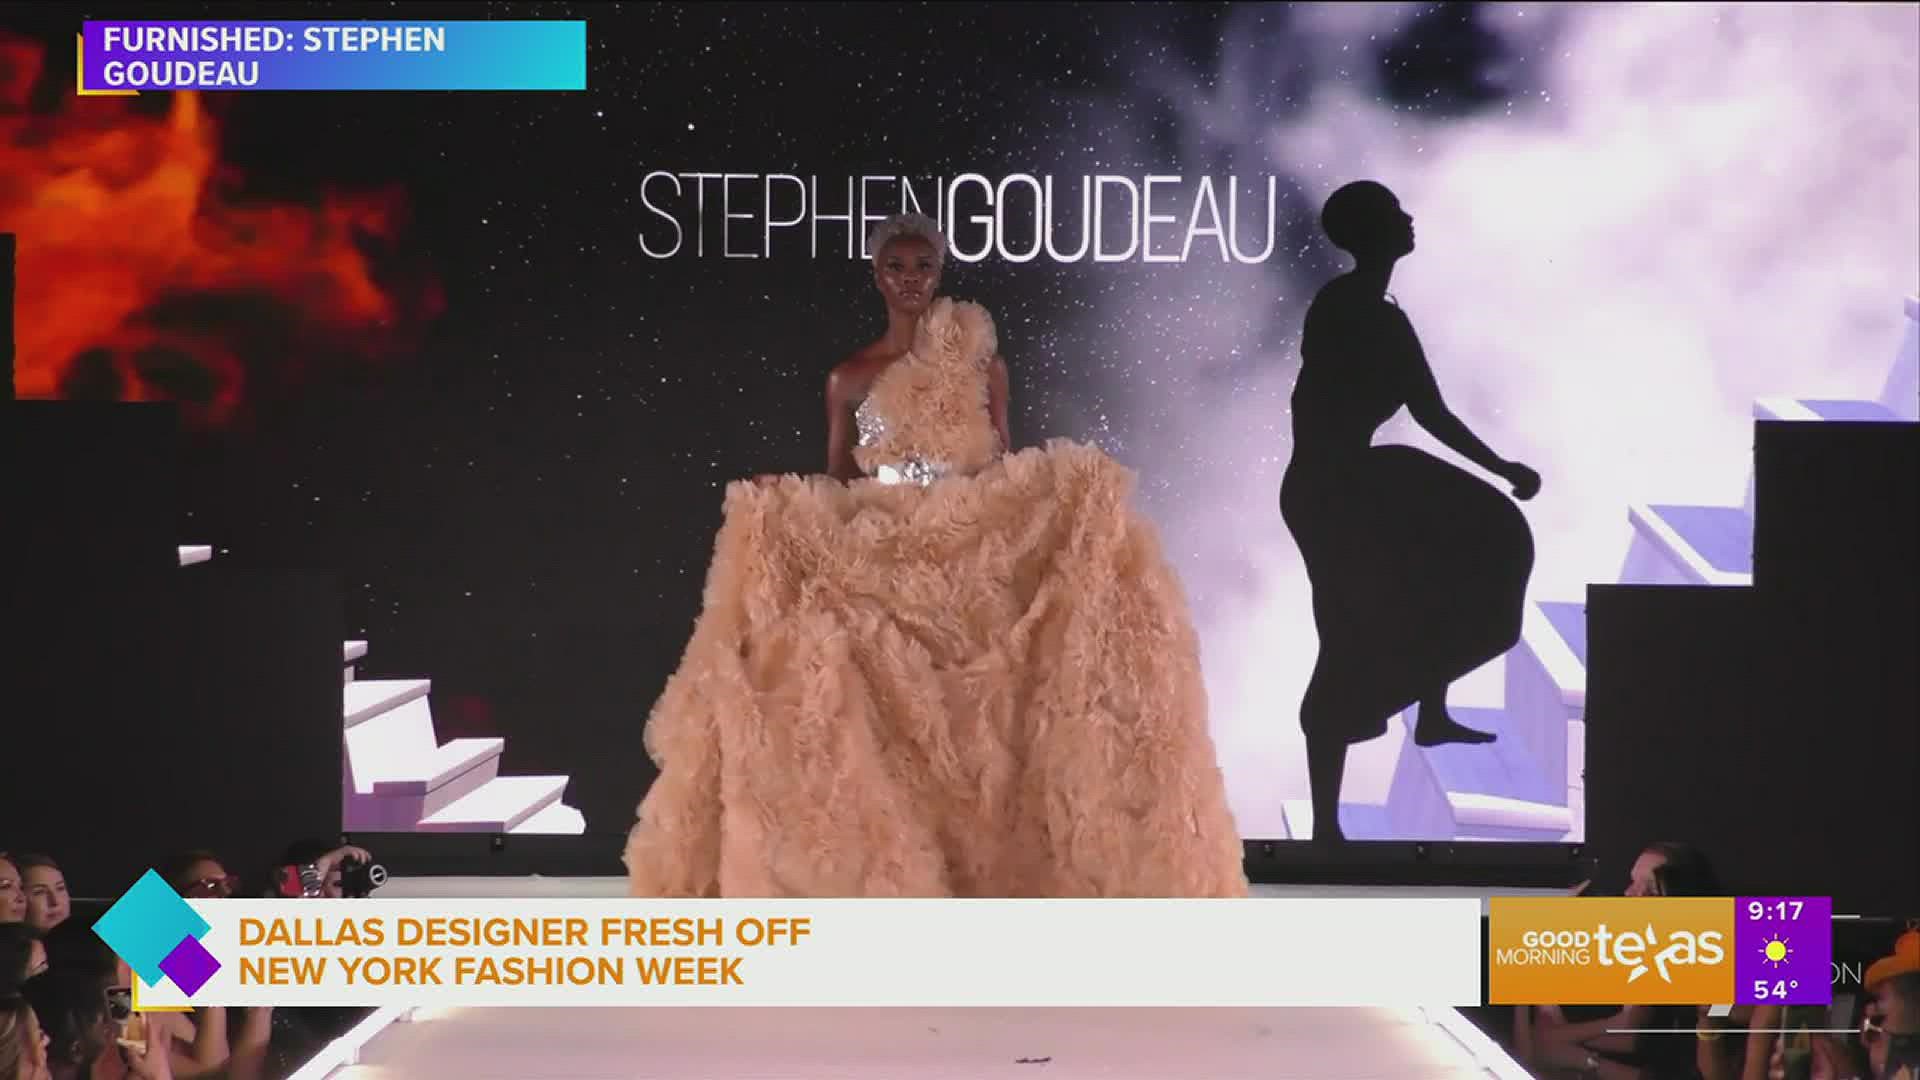 It is one of the highest achievements to any fashion designer - Local designer Stephen Goudeau achieved that, and we’ve got a feeling there will be so much more.